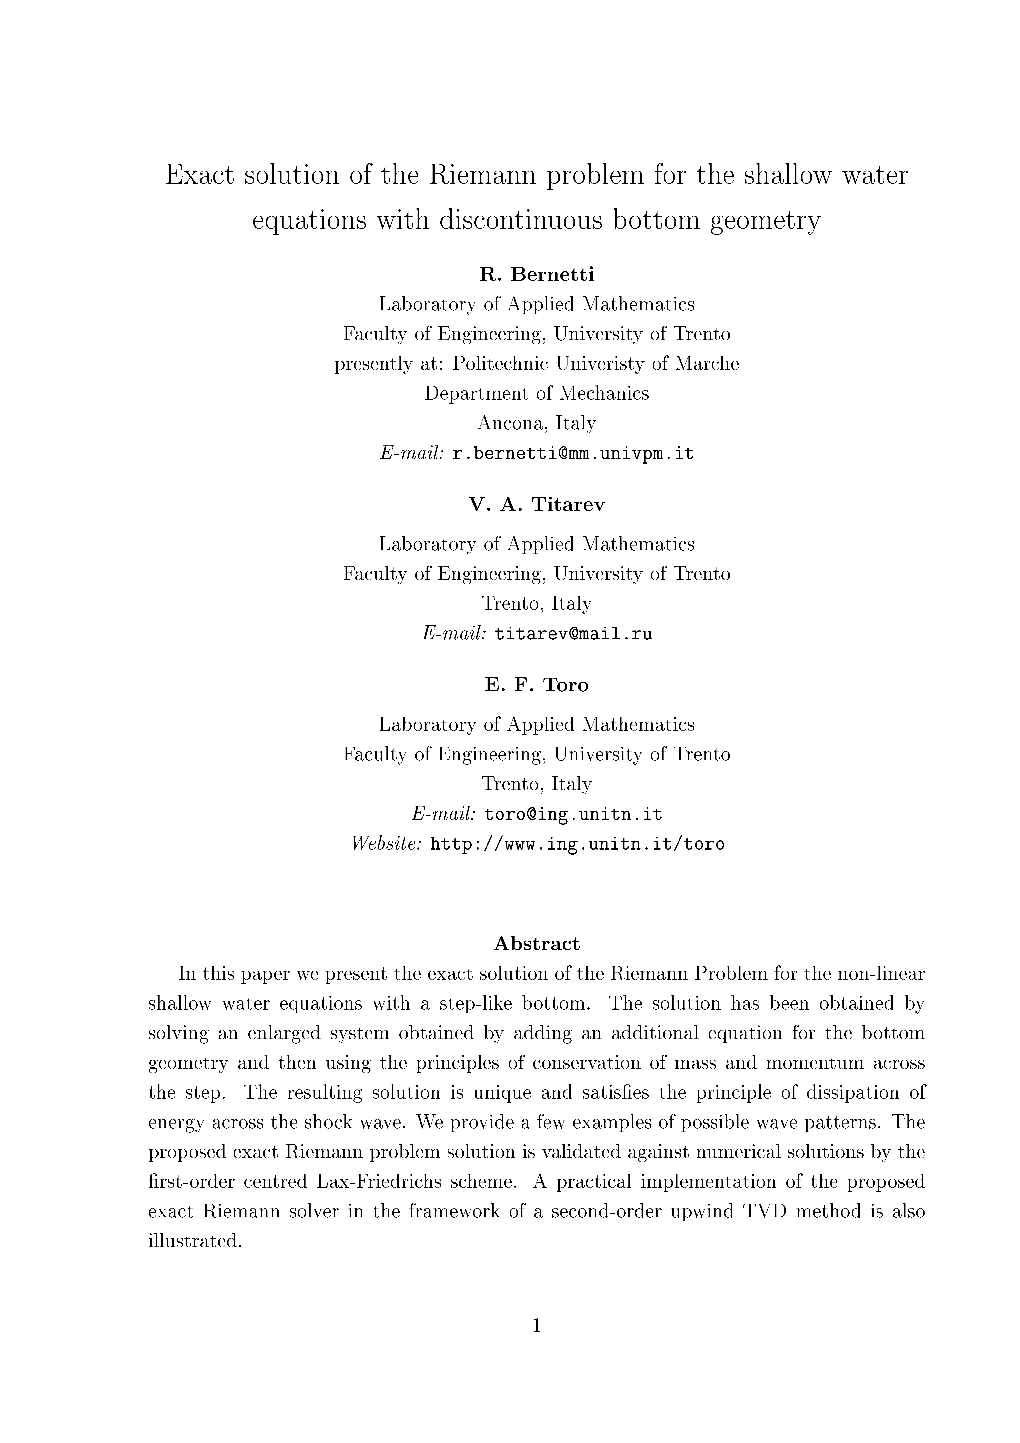 Exact Solution of the Riemann Problem for the Shallow Water Equations with Discontinuous Bottom Geometry